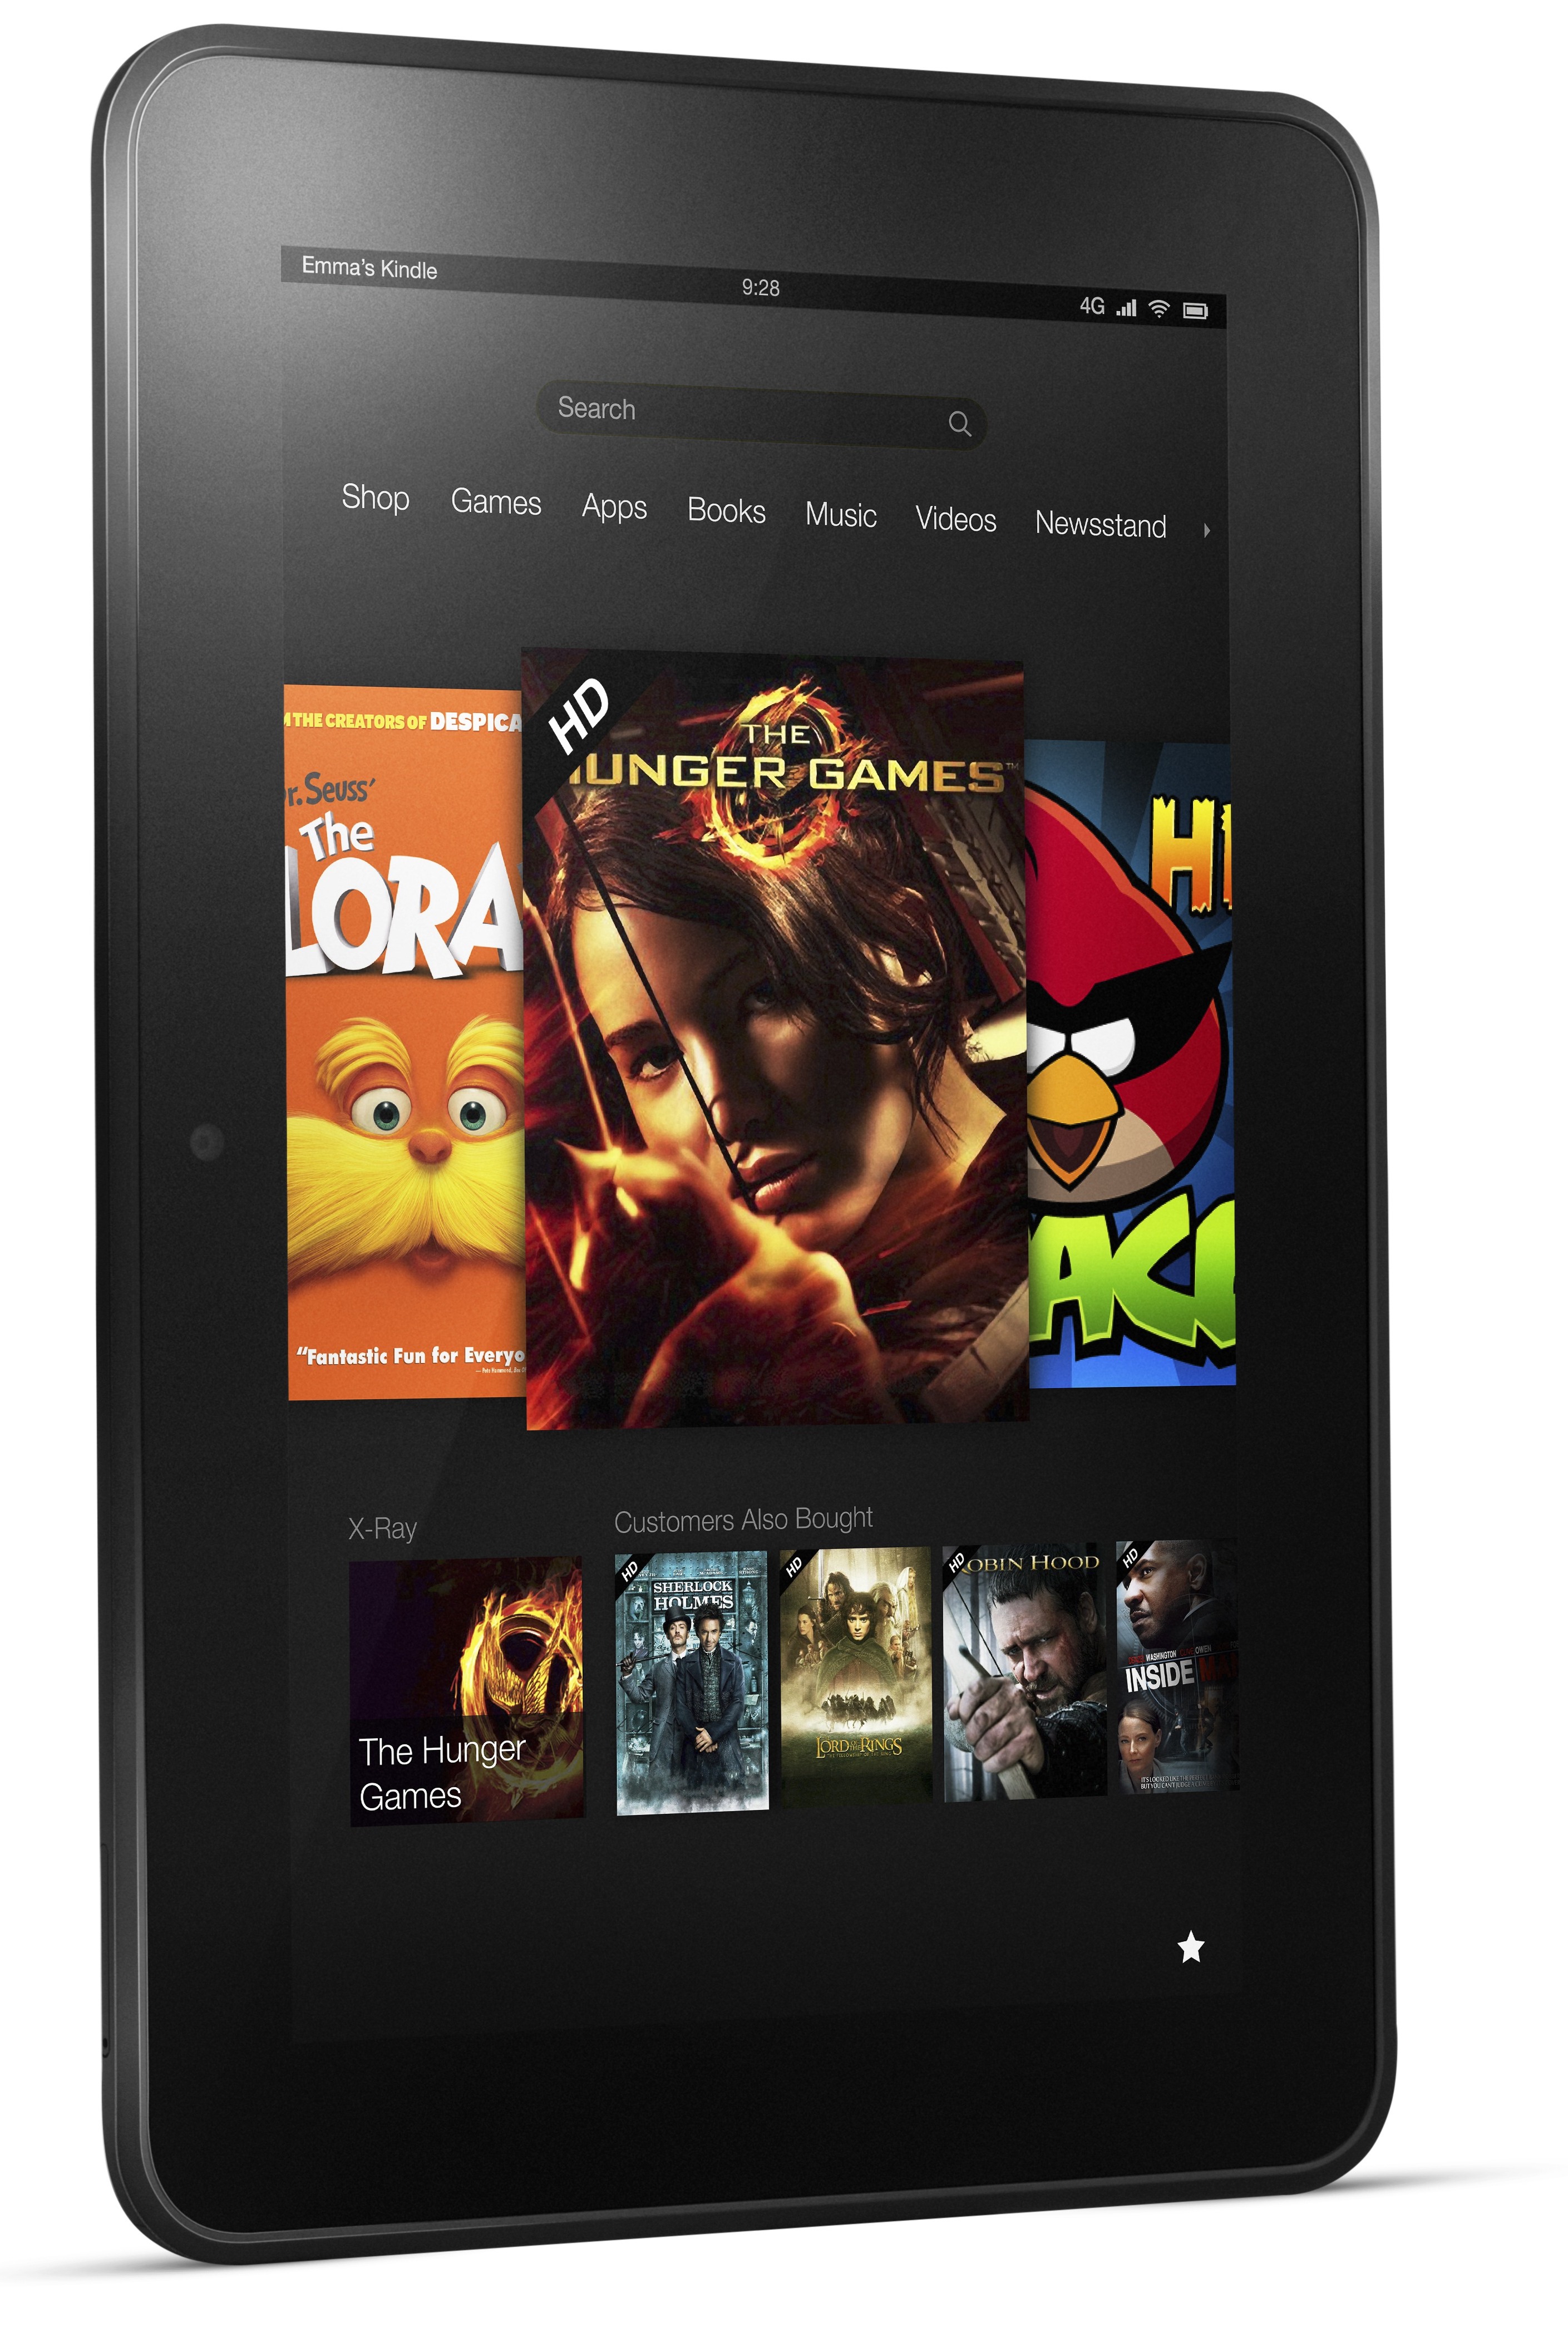 Amazon Kindle Fire Hd 8 9 4g Lte Atandt Full Specs And Price Details Gadgetian